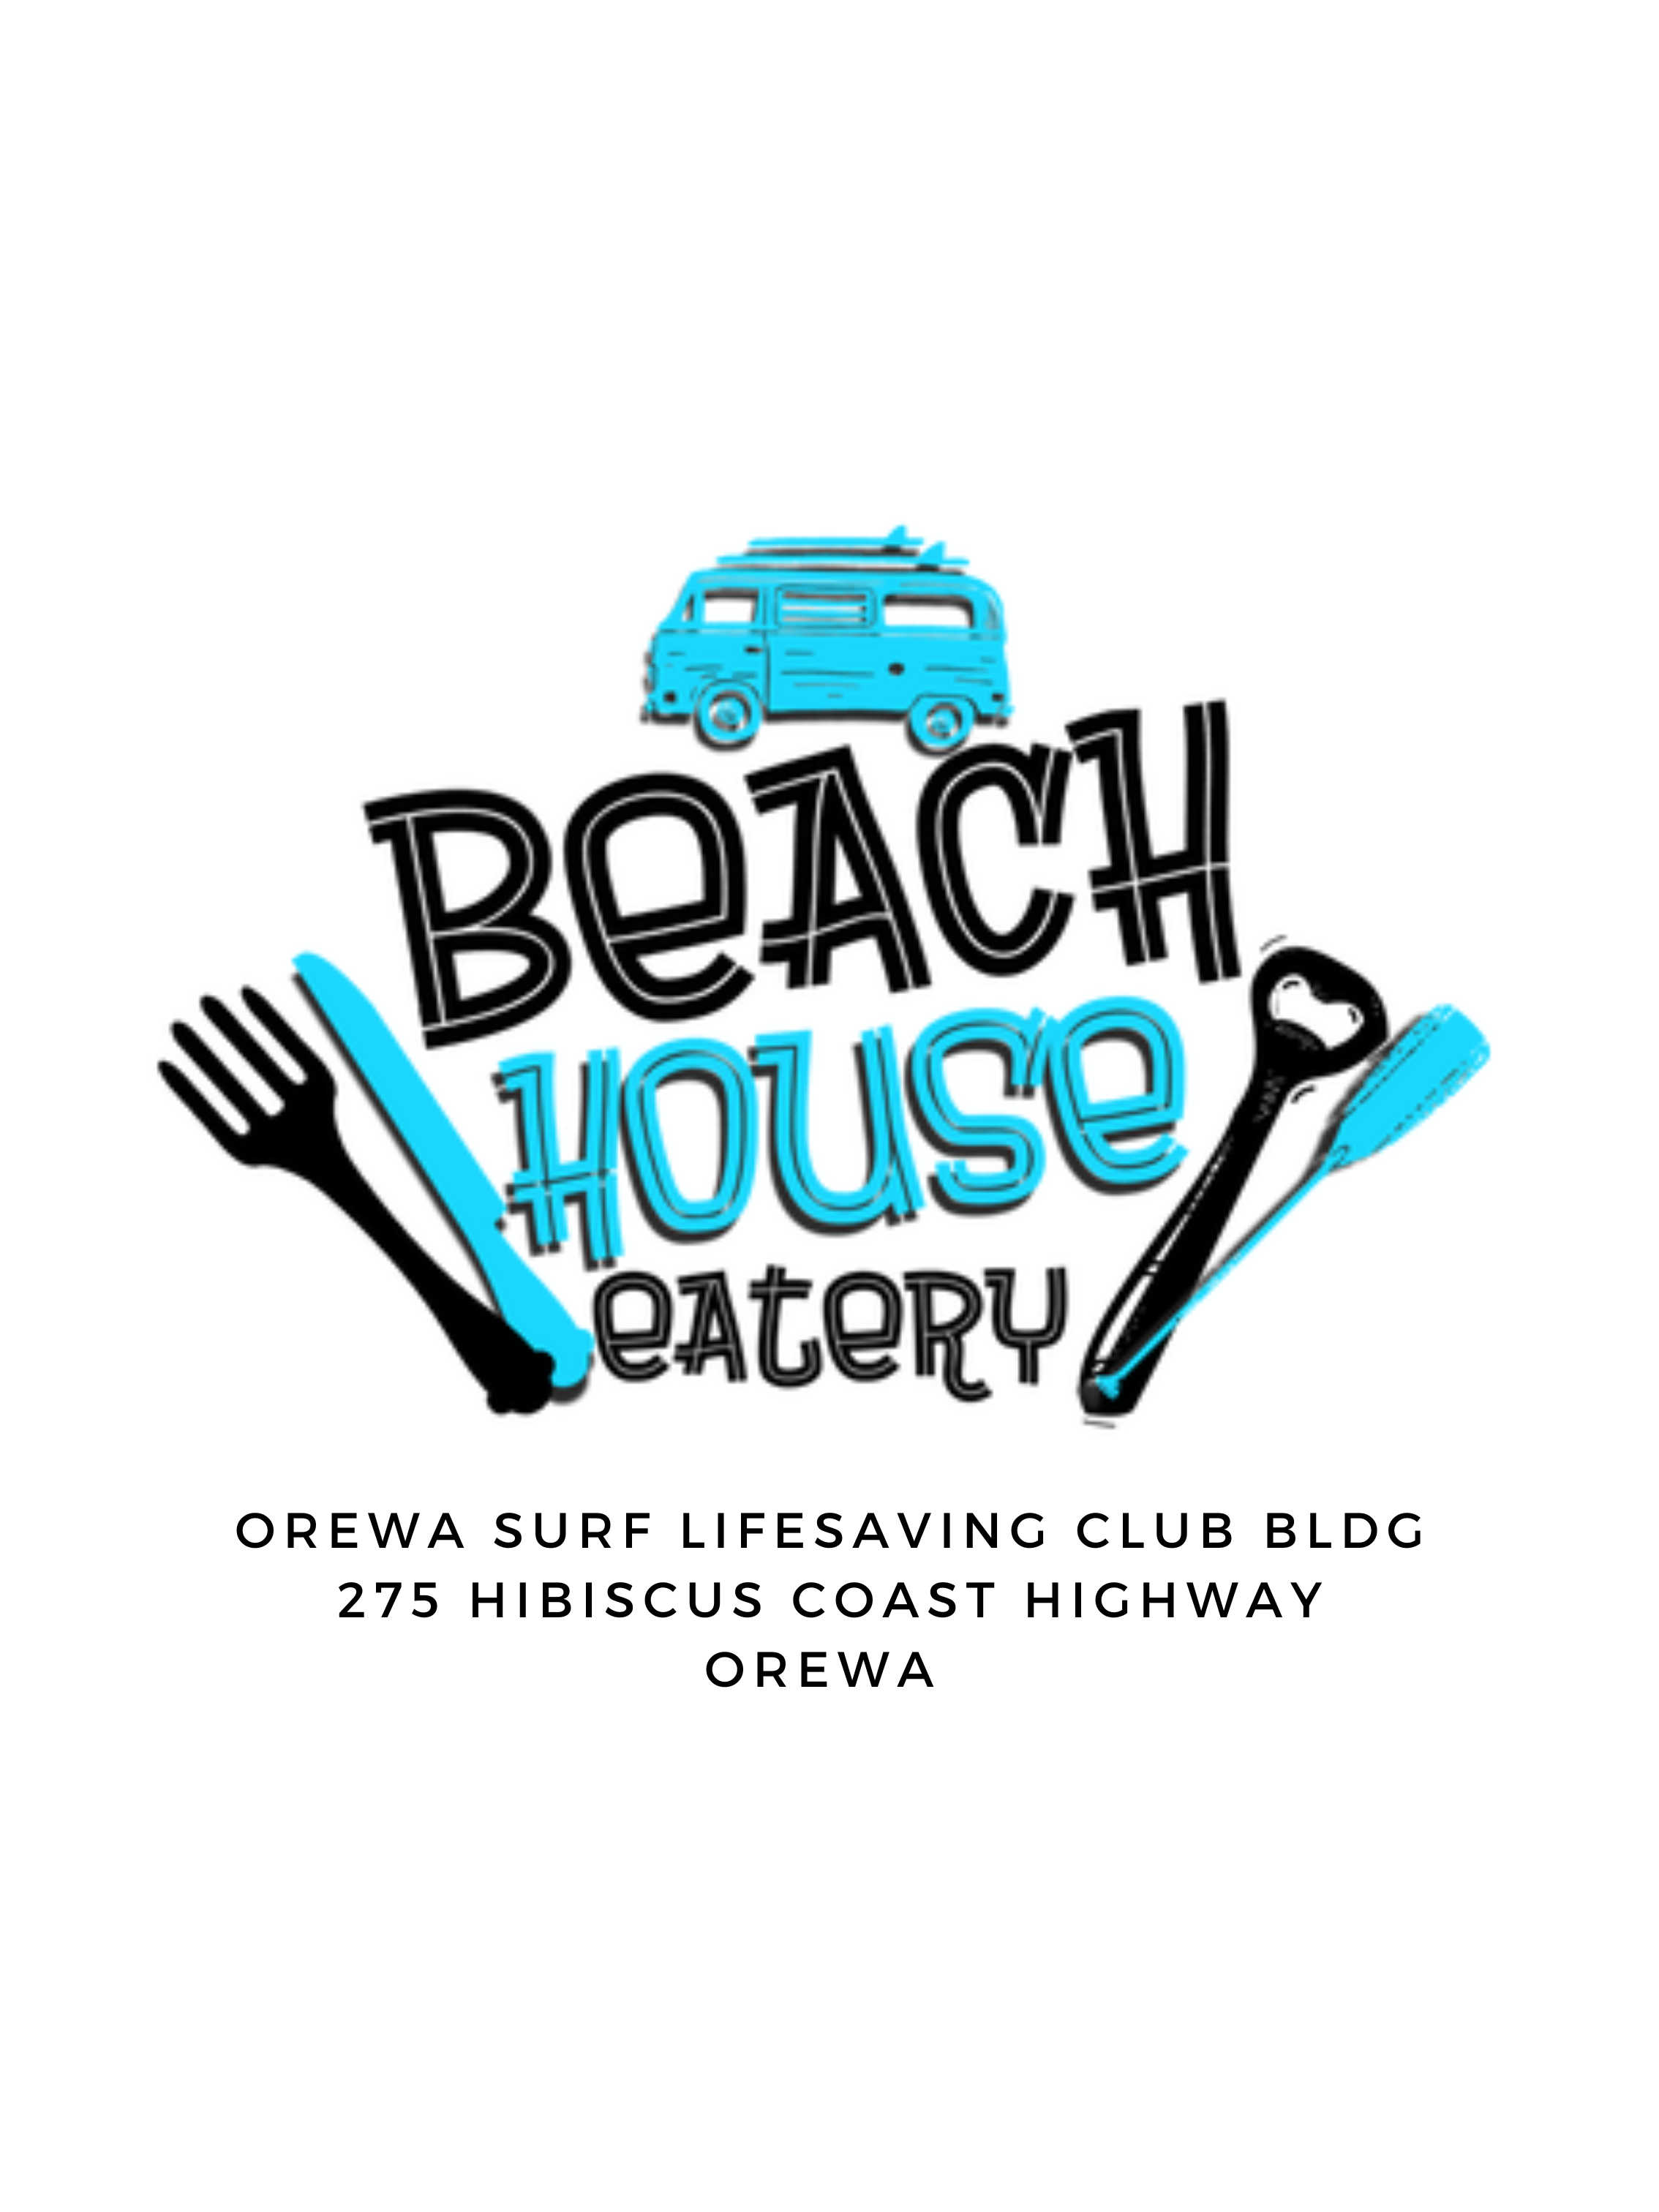 Beach House Eatery Logo with address.png